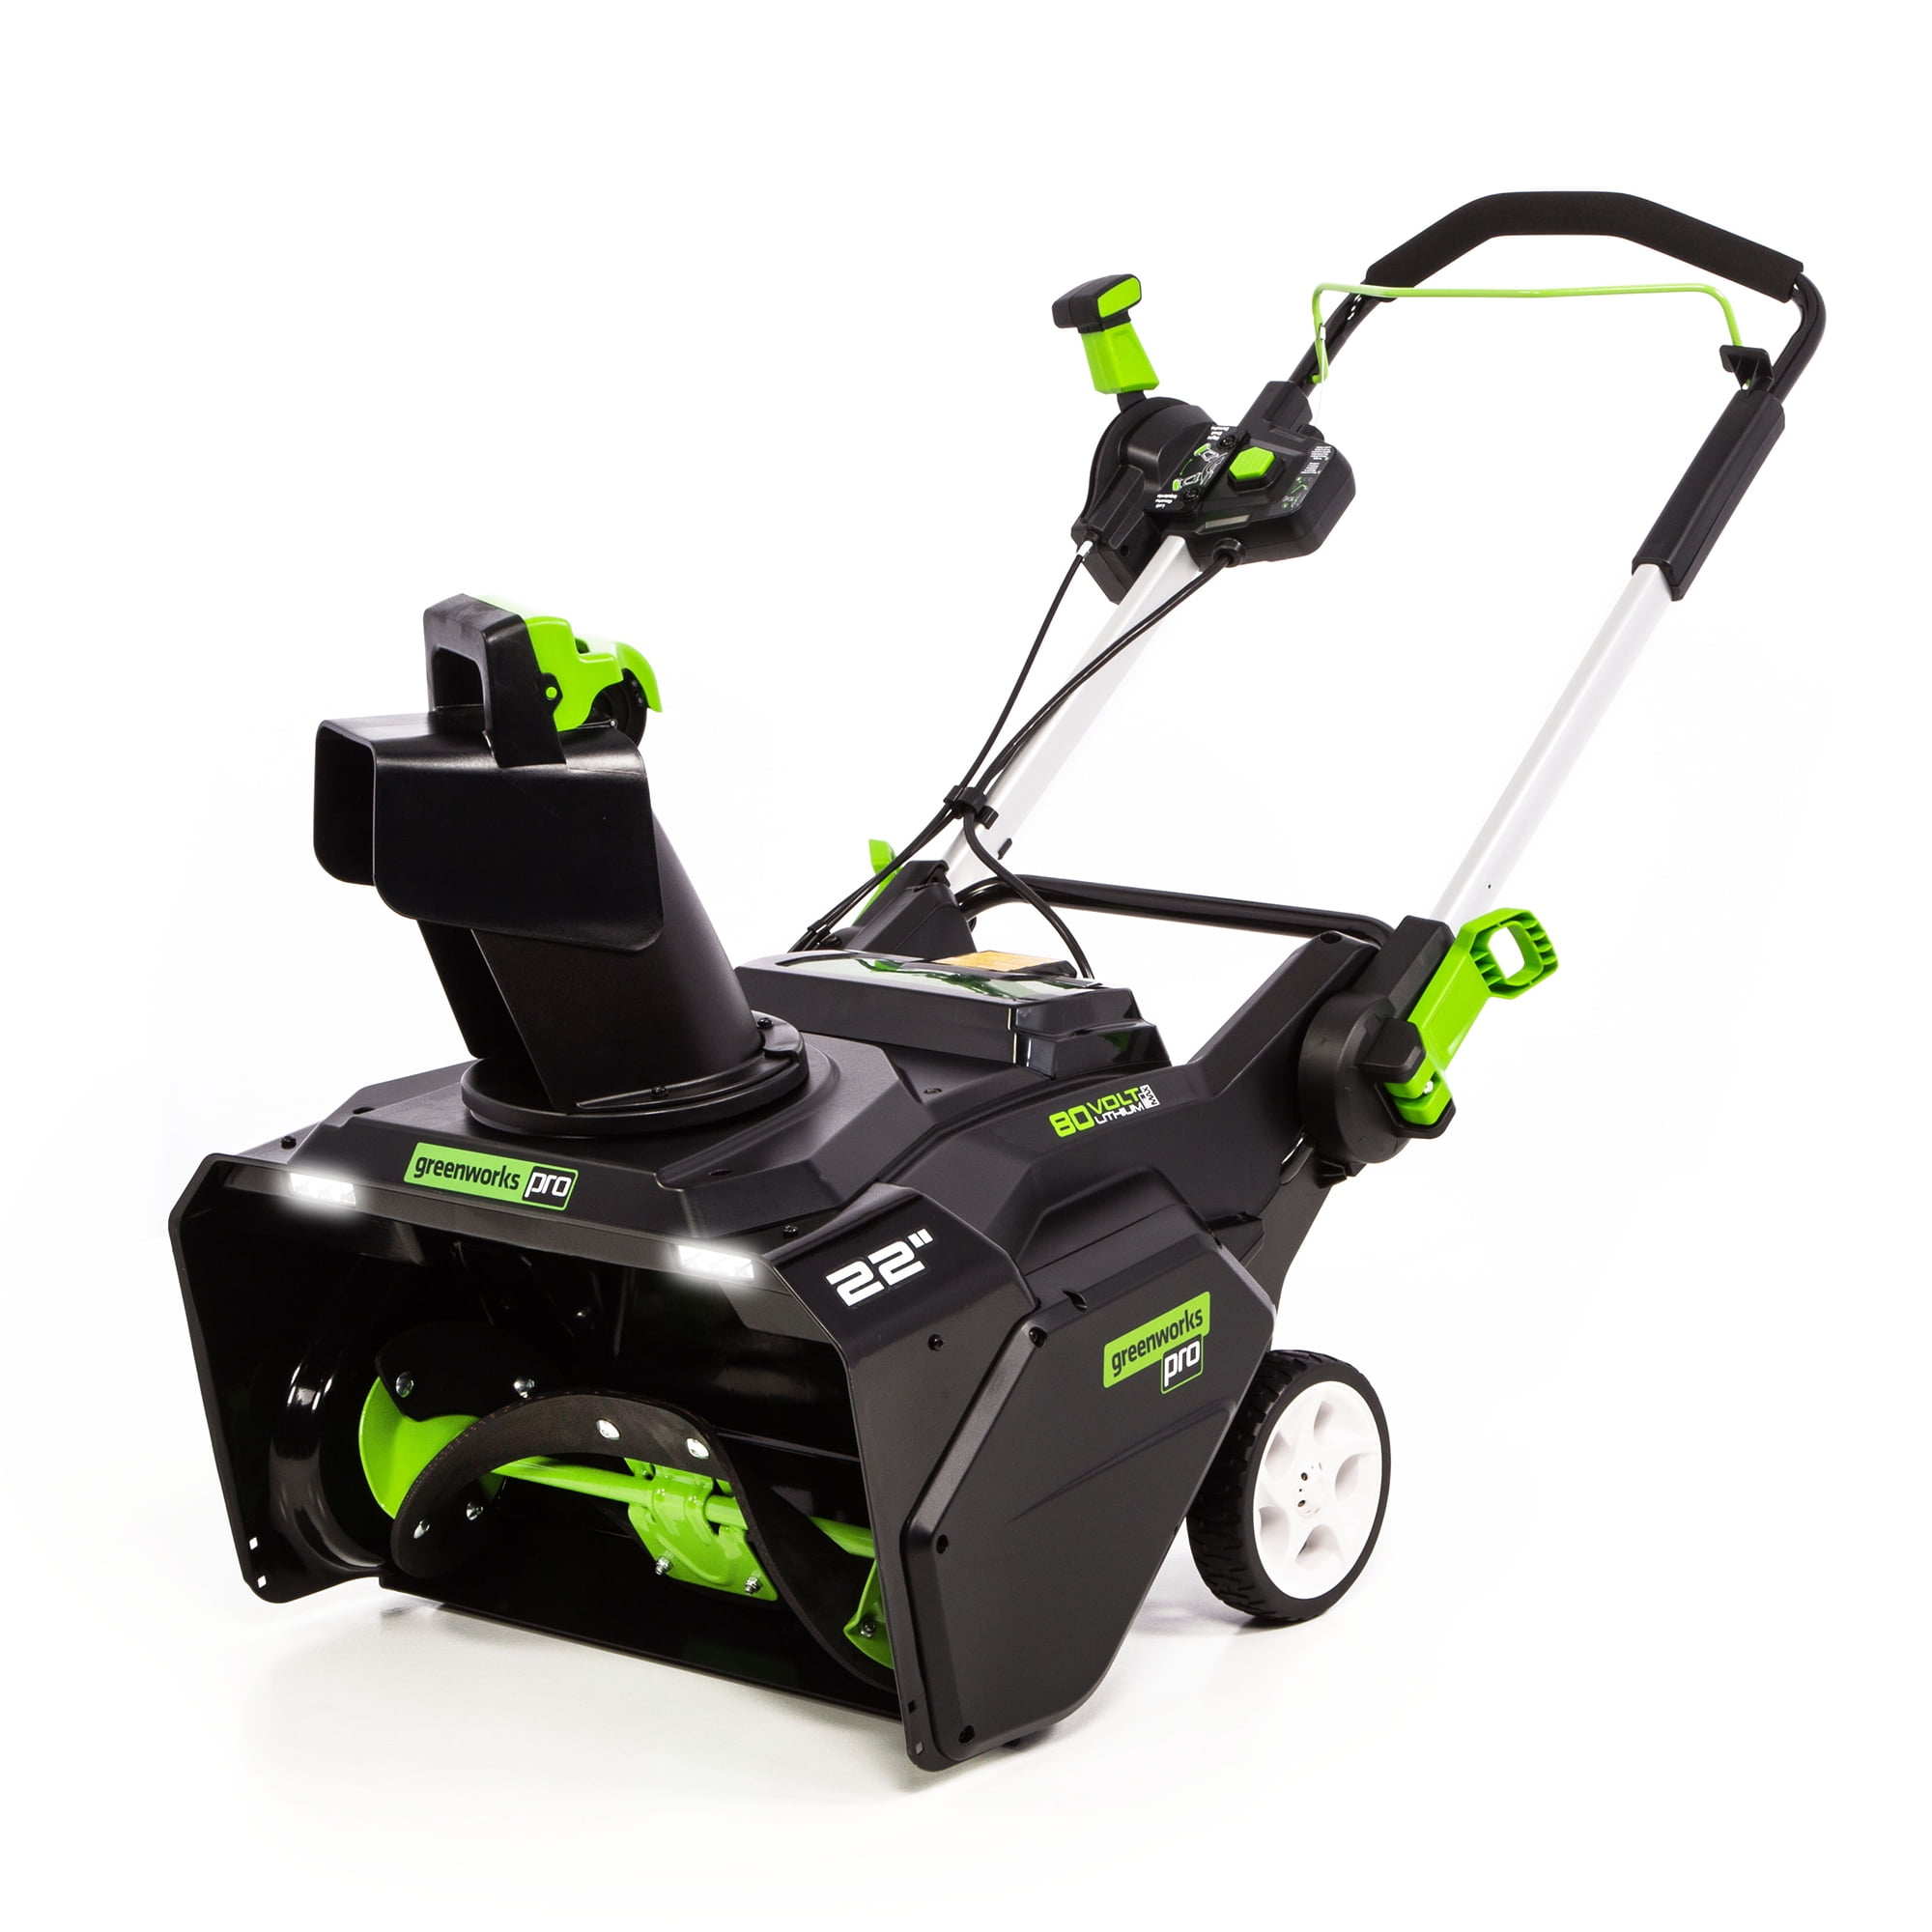 Worx and greenworks products, what are the similarities?